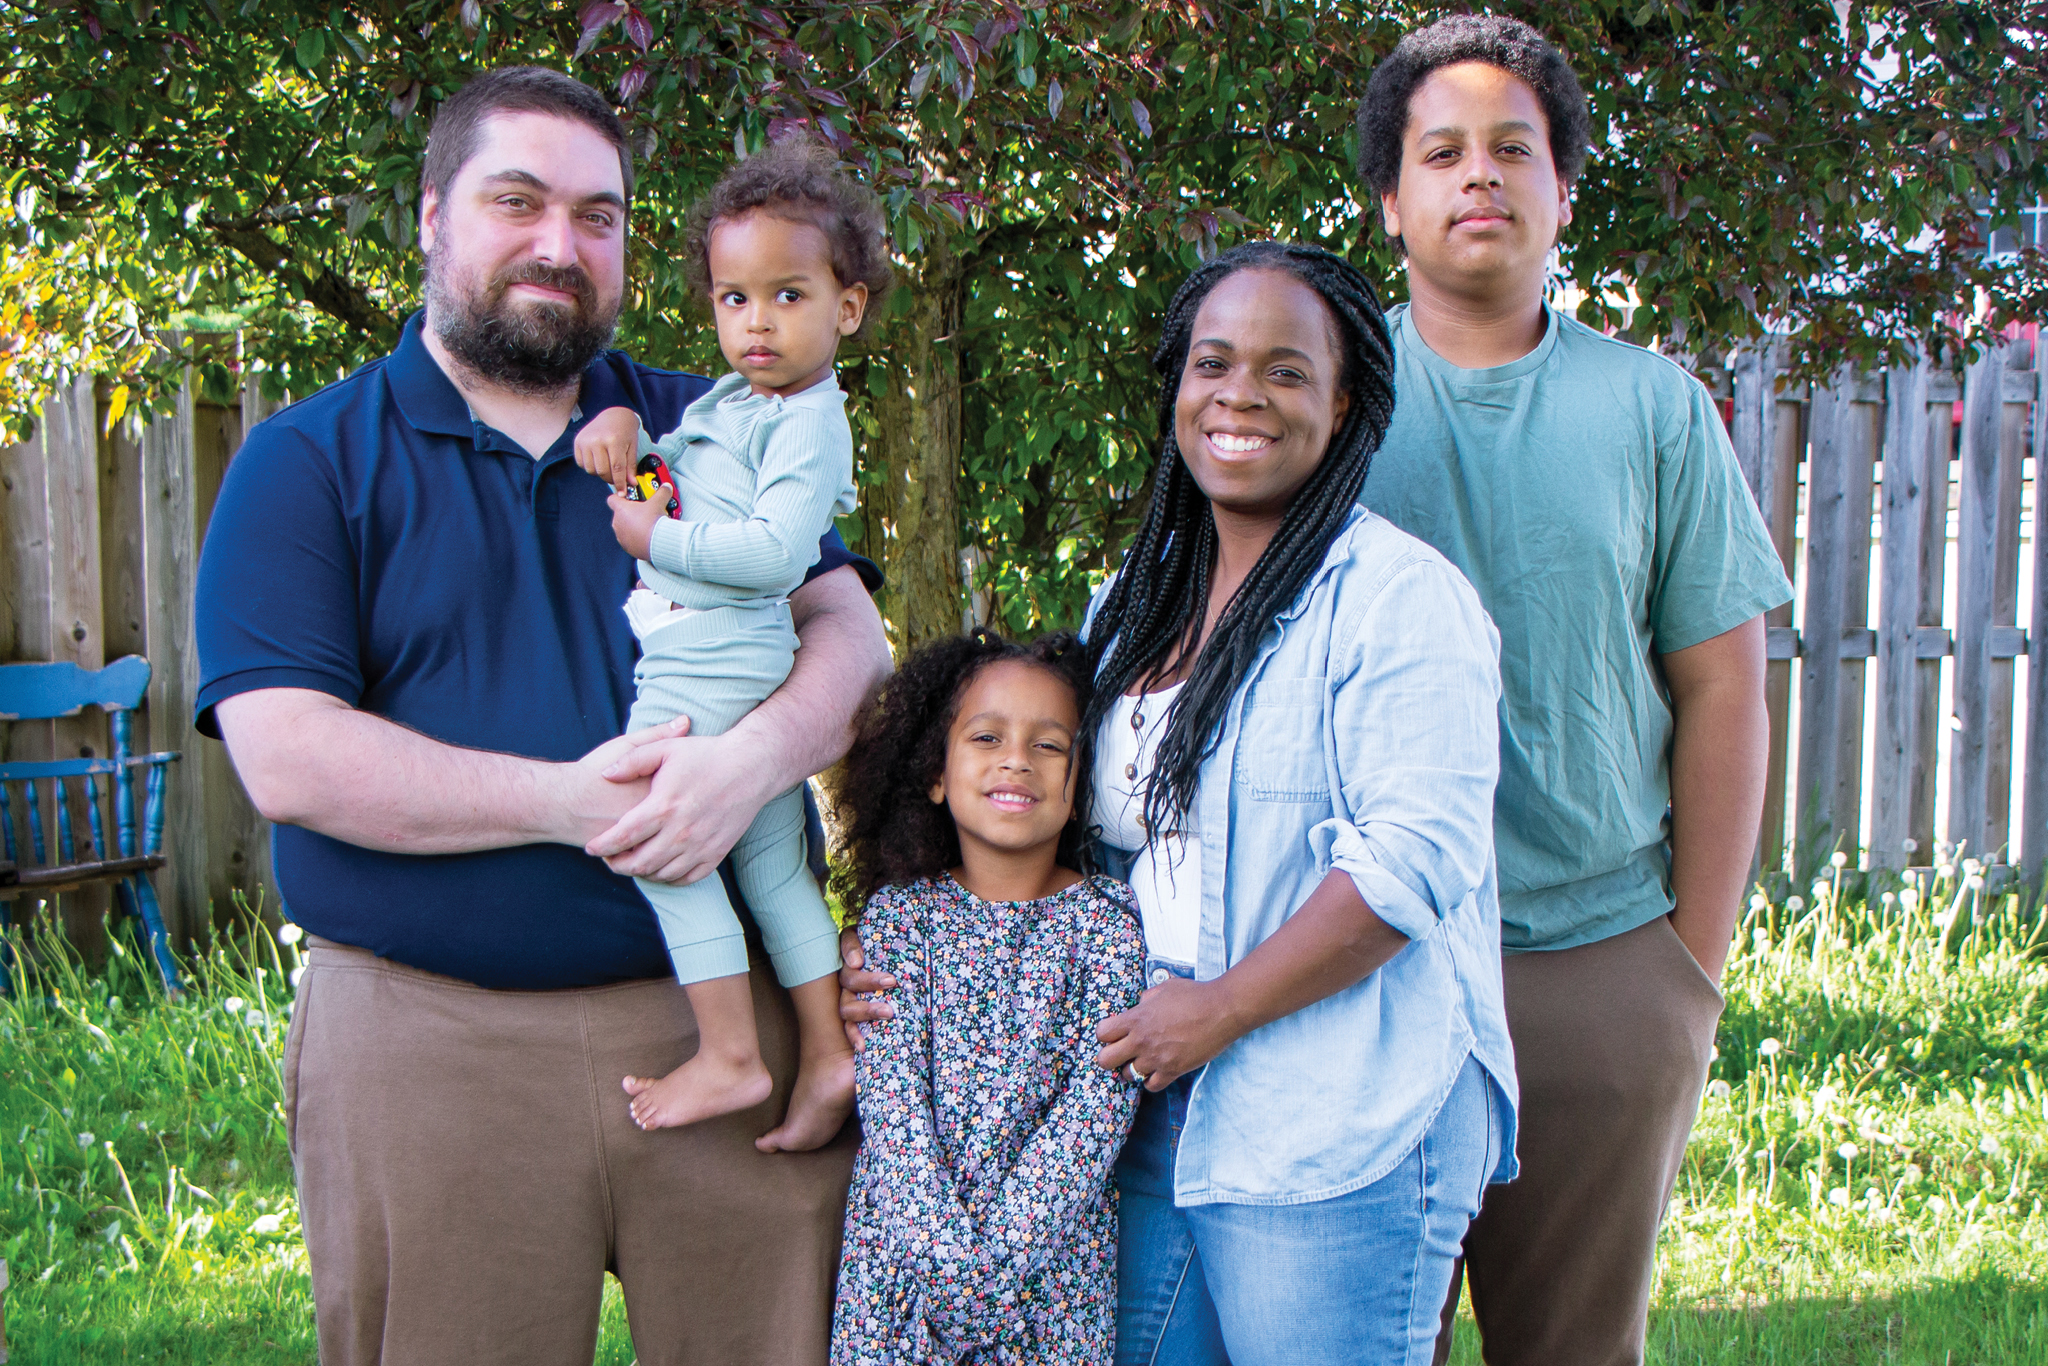 Marielle stands in a green backyard with her husband, surrounded by their three children.